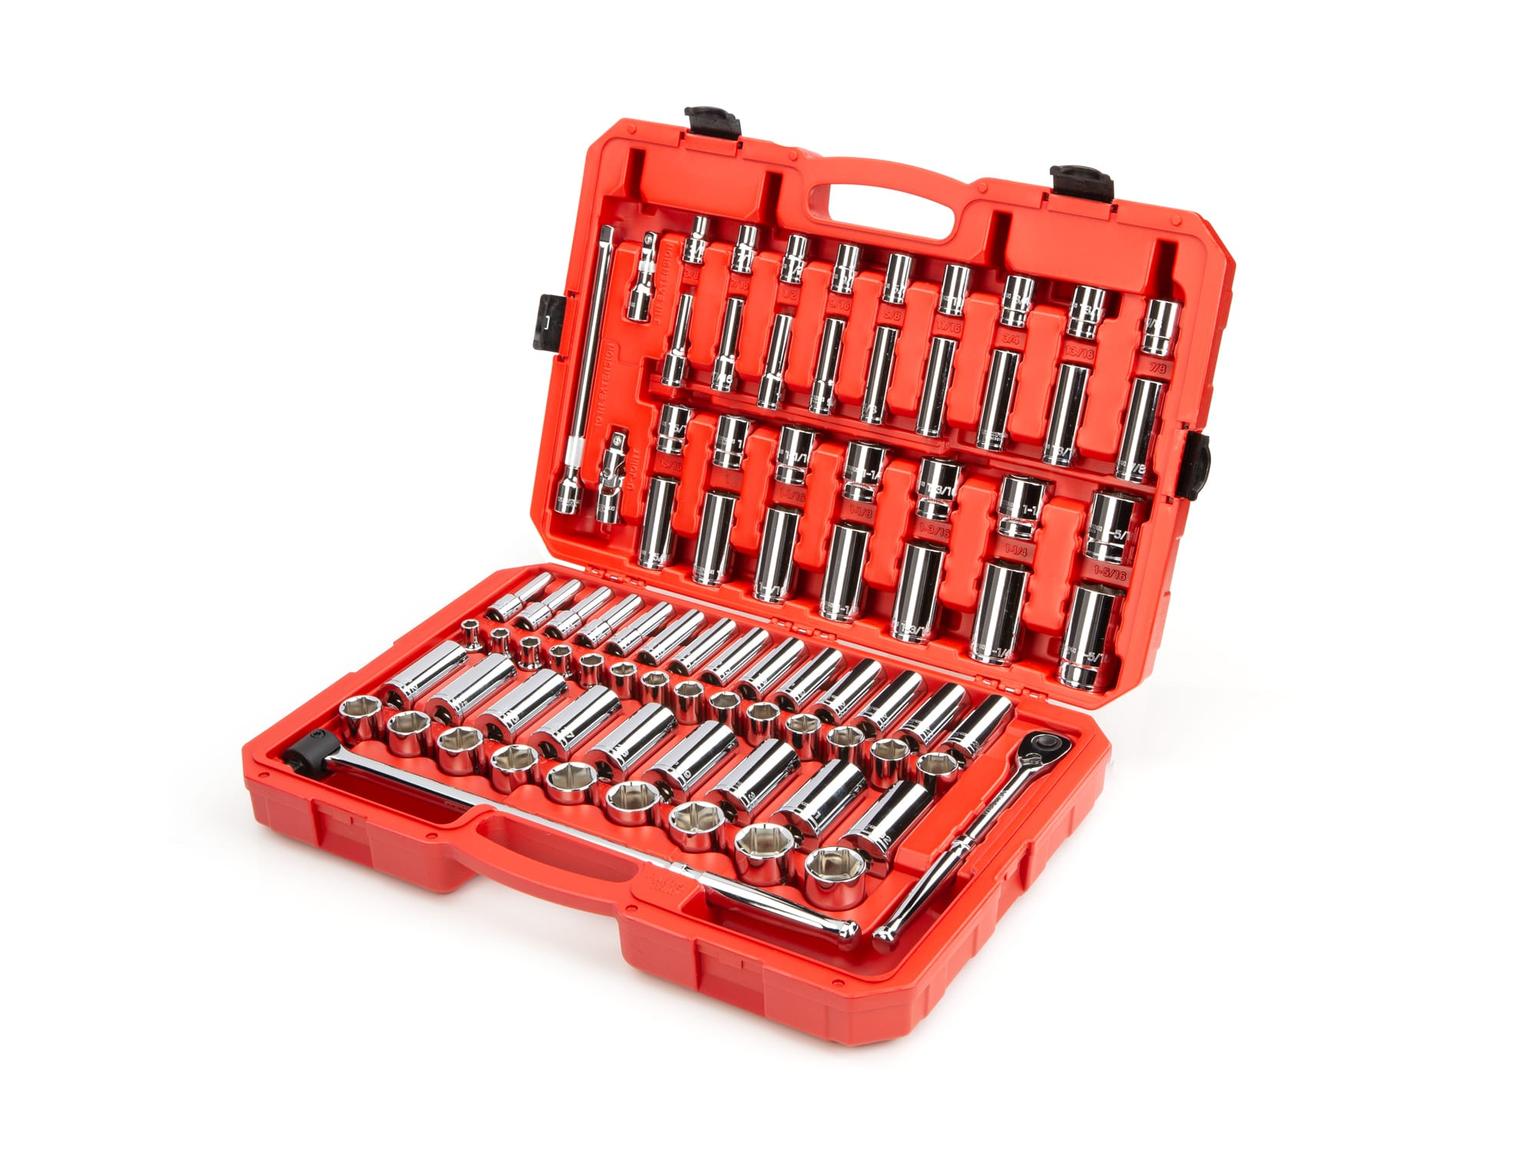 TEKTON SKT25302-D 1/2 Inch Drive 6-Point Socket and Ratchet Set, 83-Piece (3/8 - 1-5/16 in., 10-32 mm)